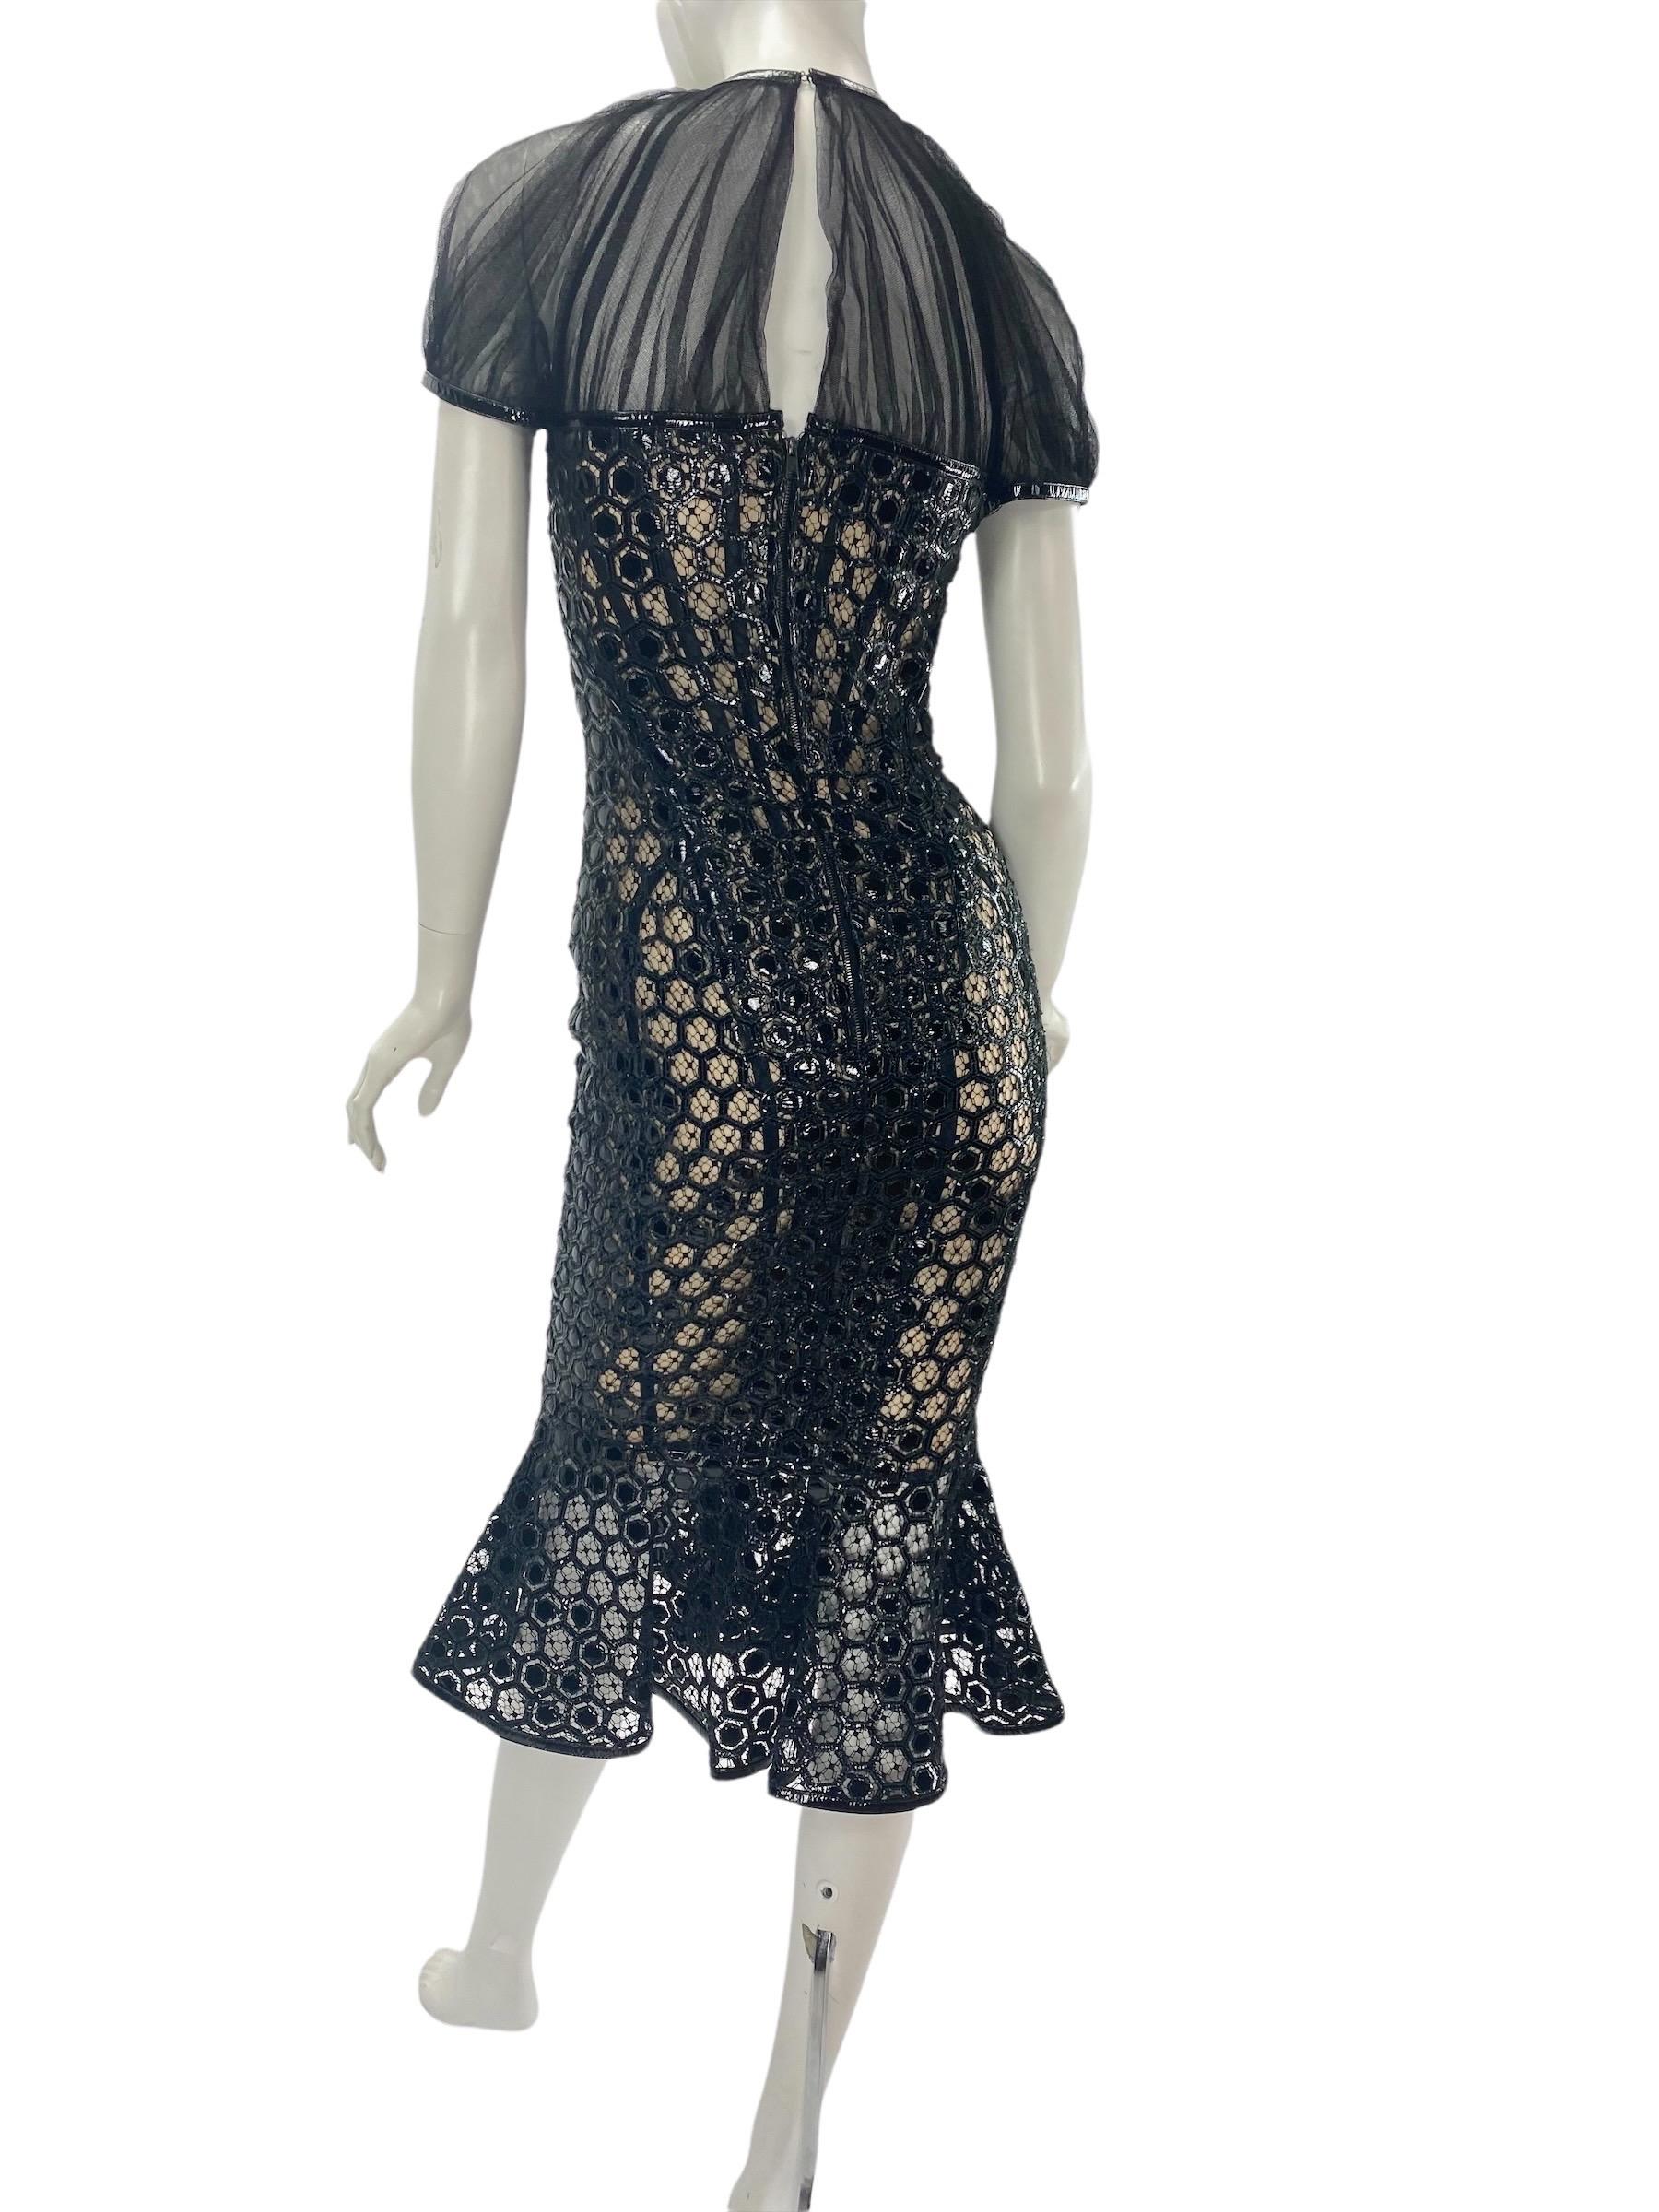 ALEXANDER McQUEEN Black Honeycomb-effect Patent-Leather & Tulle Corset Dress 38 For Sale 4